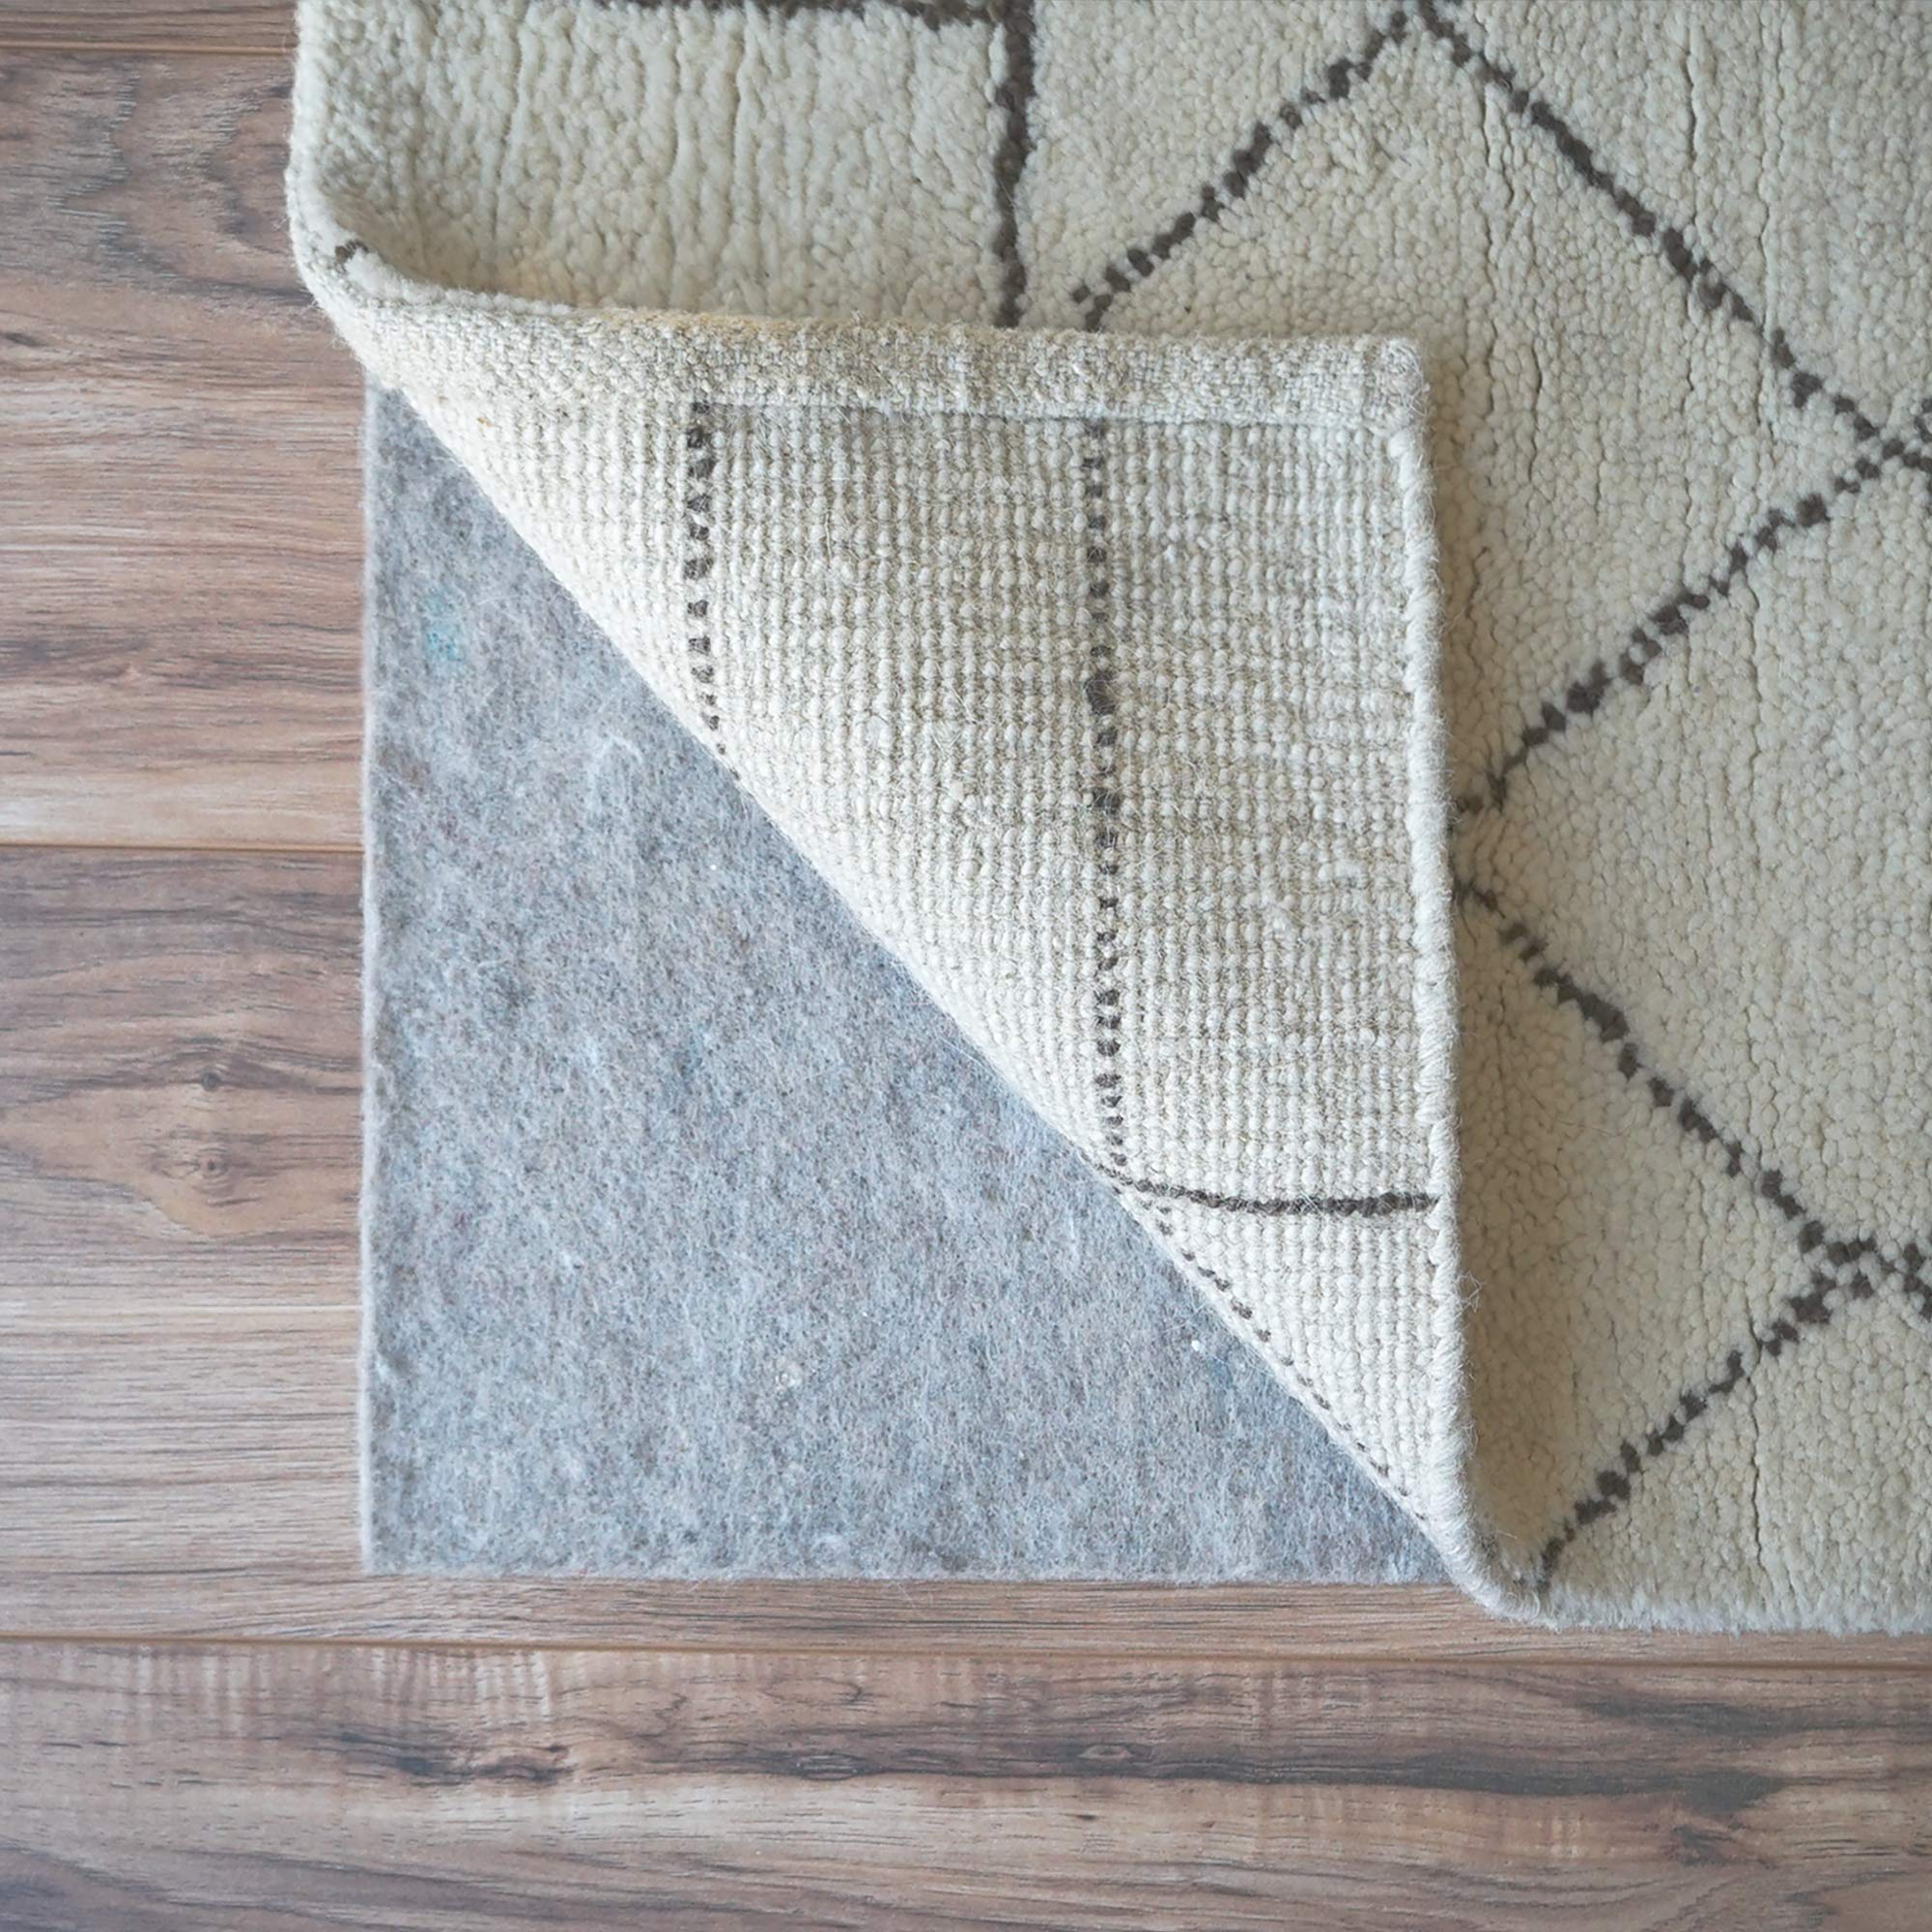 RUGPADUSA - Basics - 3'10" x 5'10" - 1/4" Thick - Felt + Rubber - Non-Slip Rug Pad - Cushioning Felt for Added Comfort - Safe for All Floors and Finishes